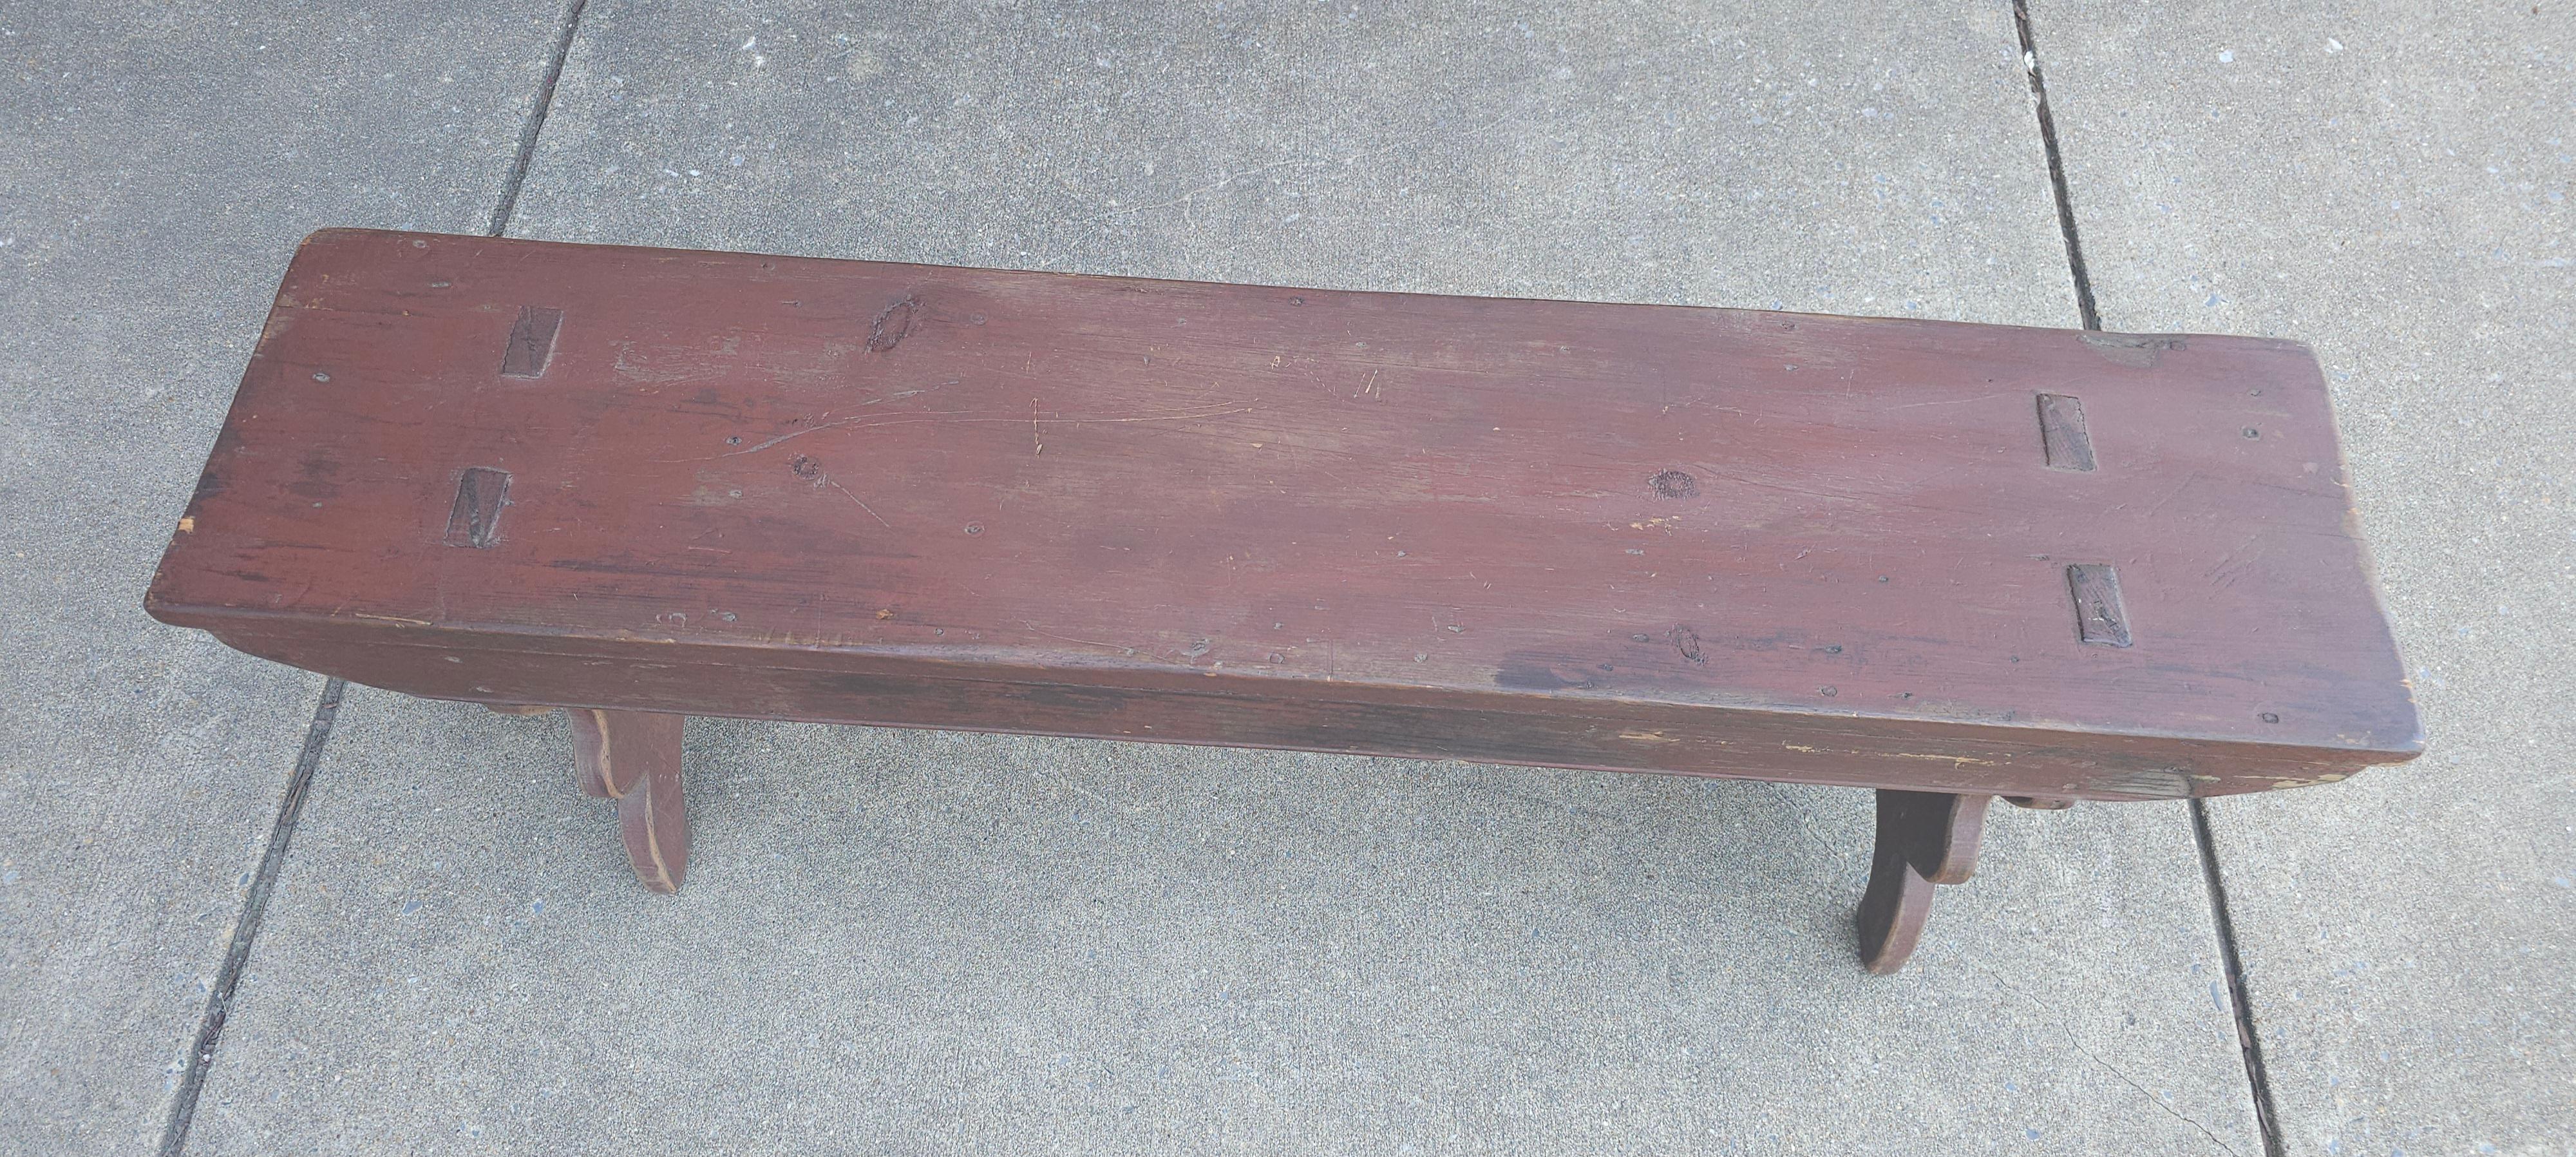 Hardwood Early American Primitive Bench For Sale